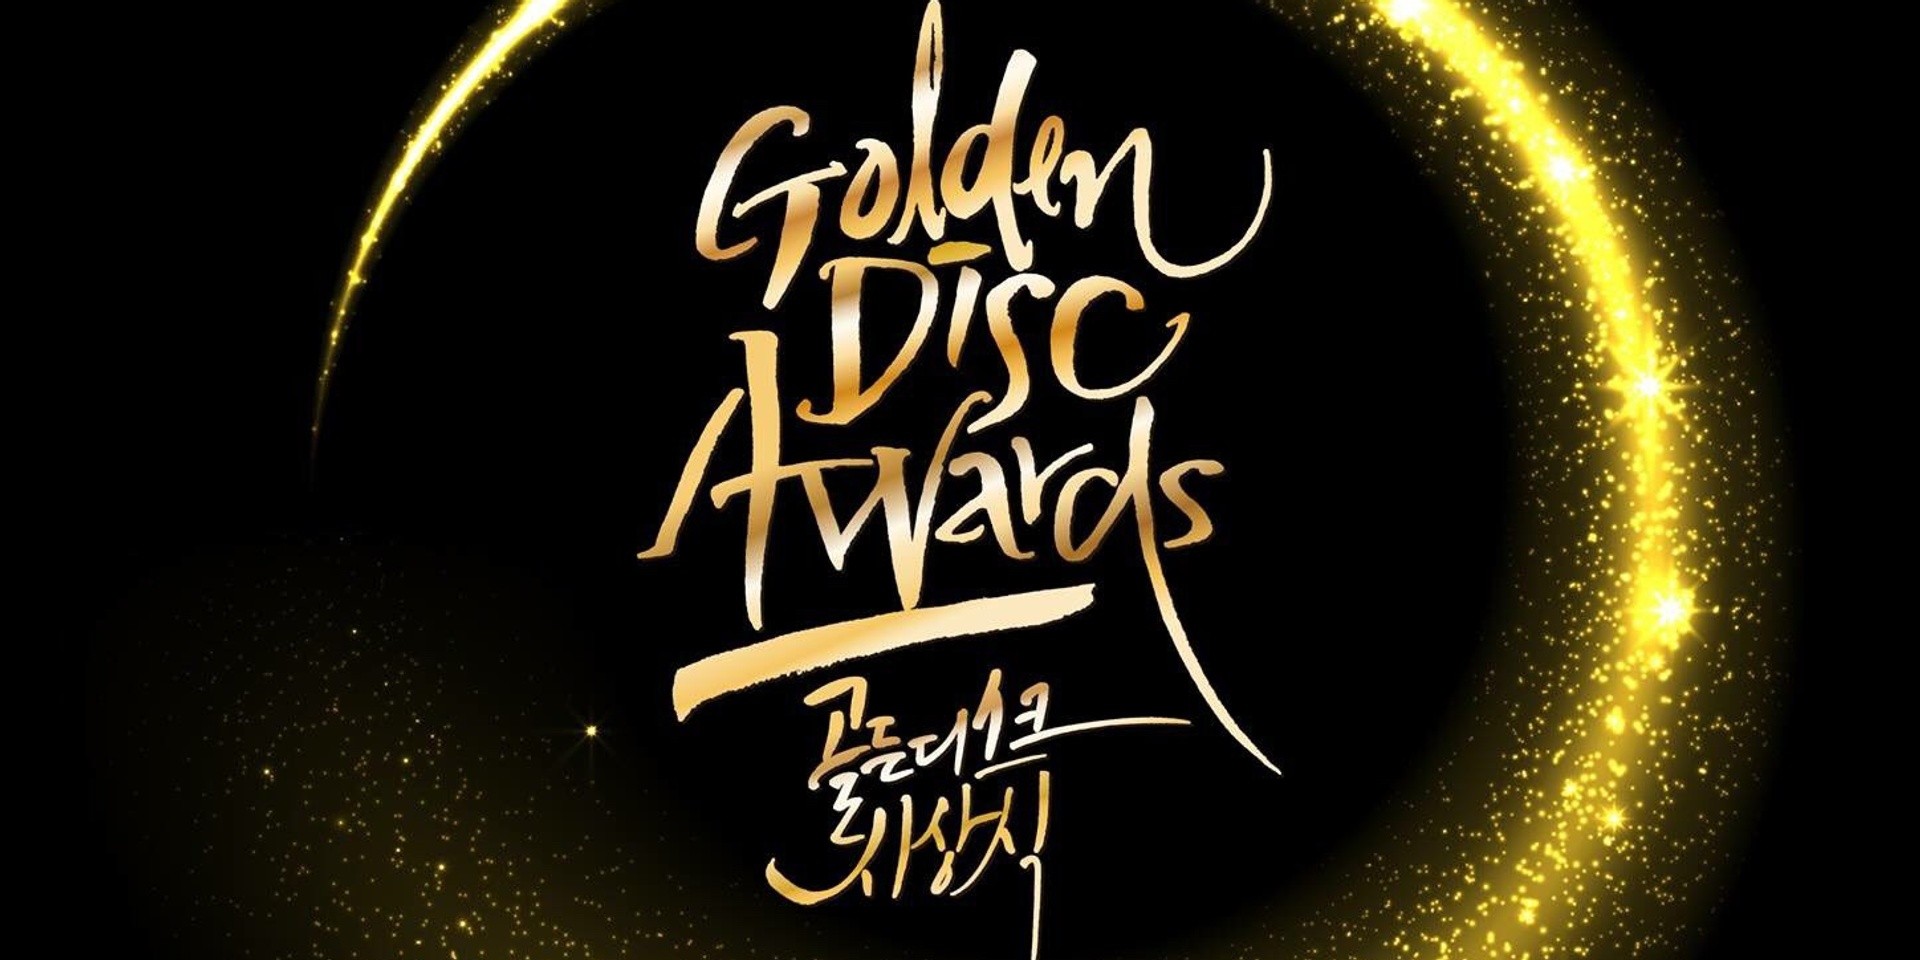 Golden Disc Awards to be held in South Korea in 2018